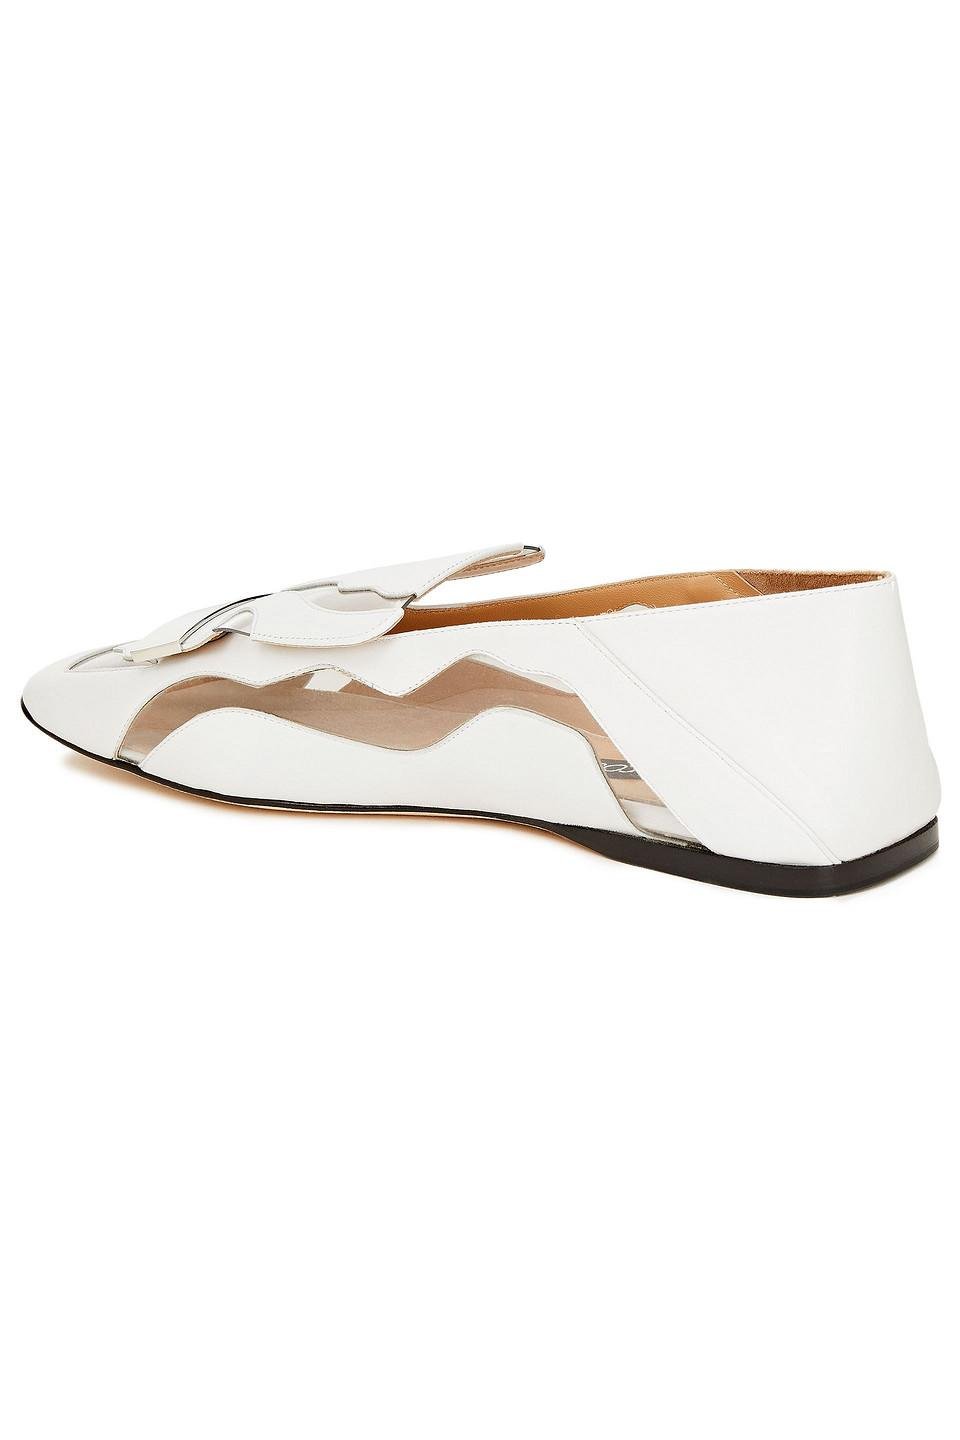 Sergio Rossi Sr1 Leather And Pvc Collapsible-heel Loafers in White 